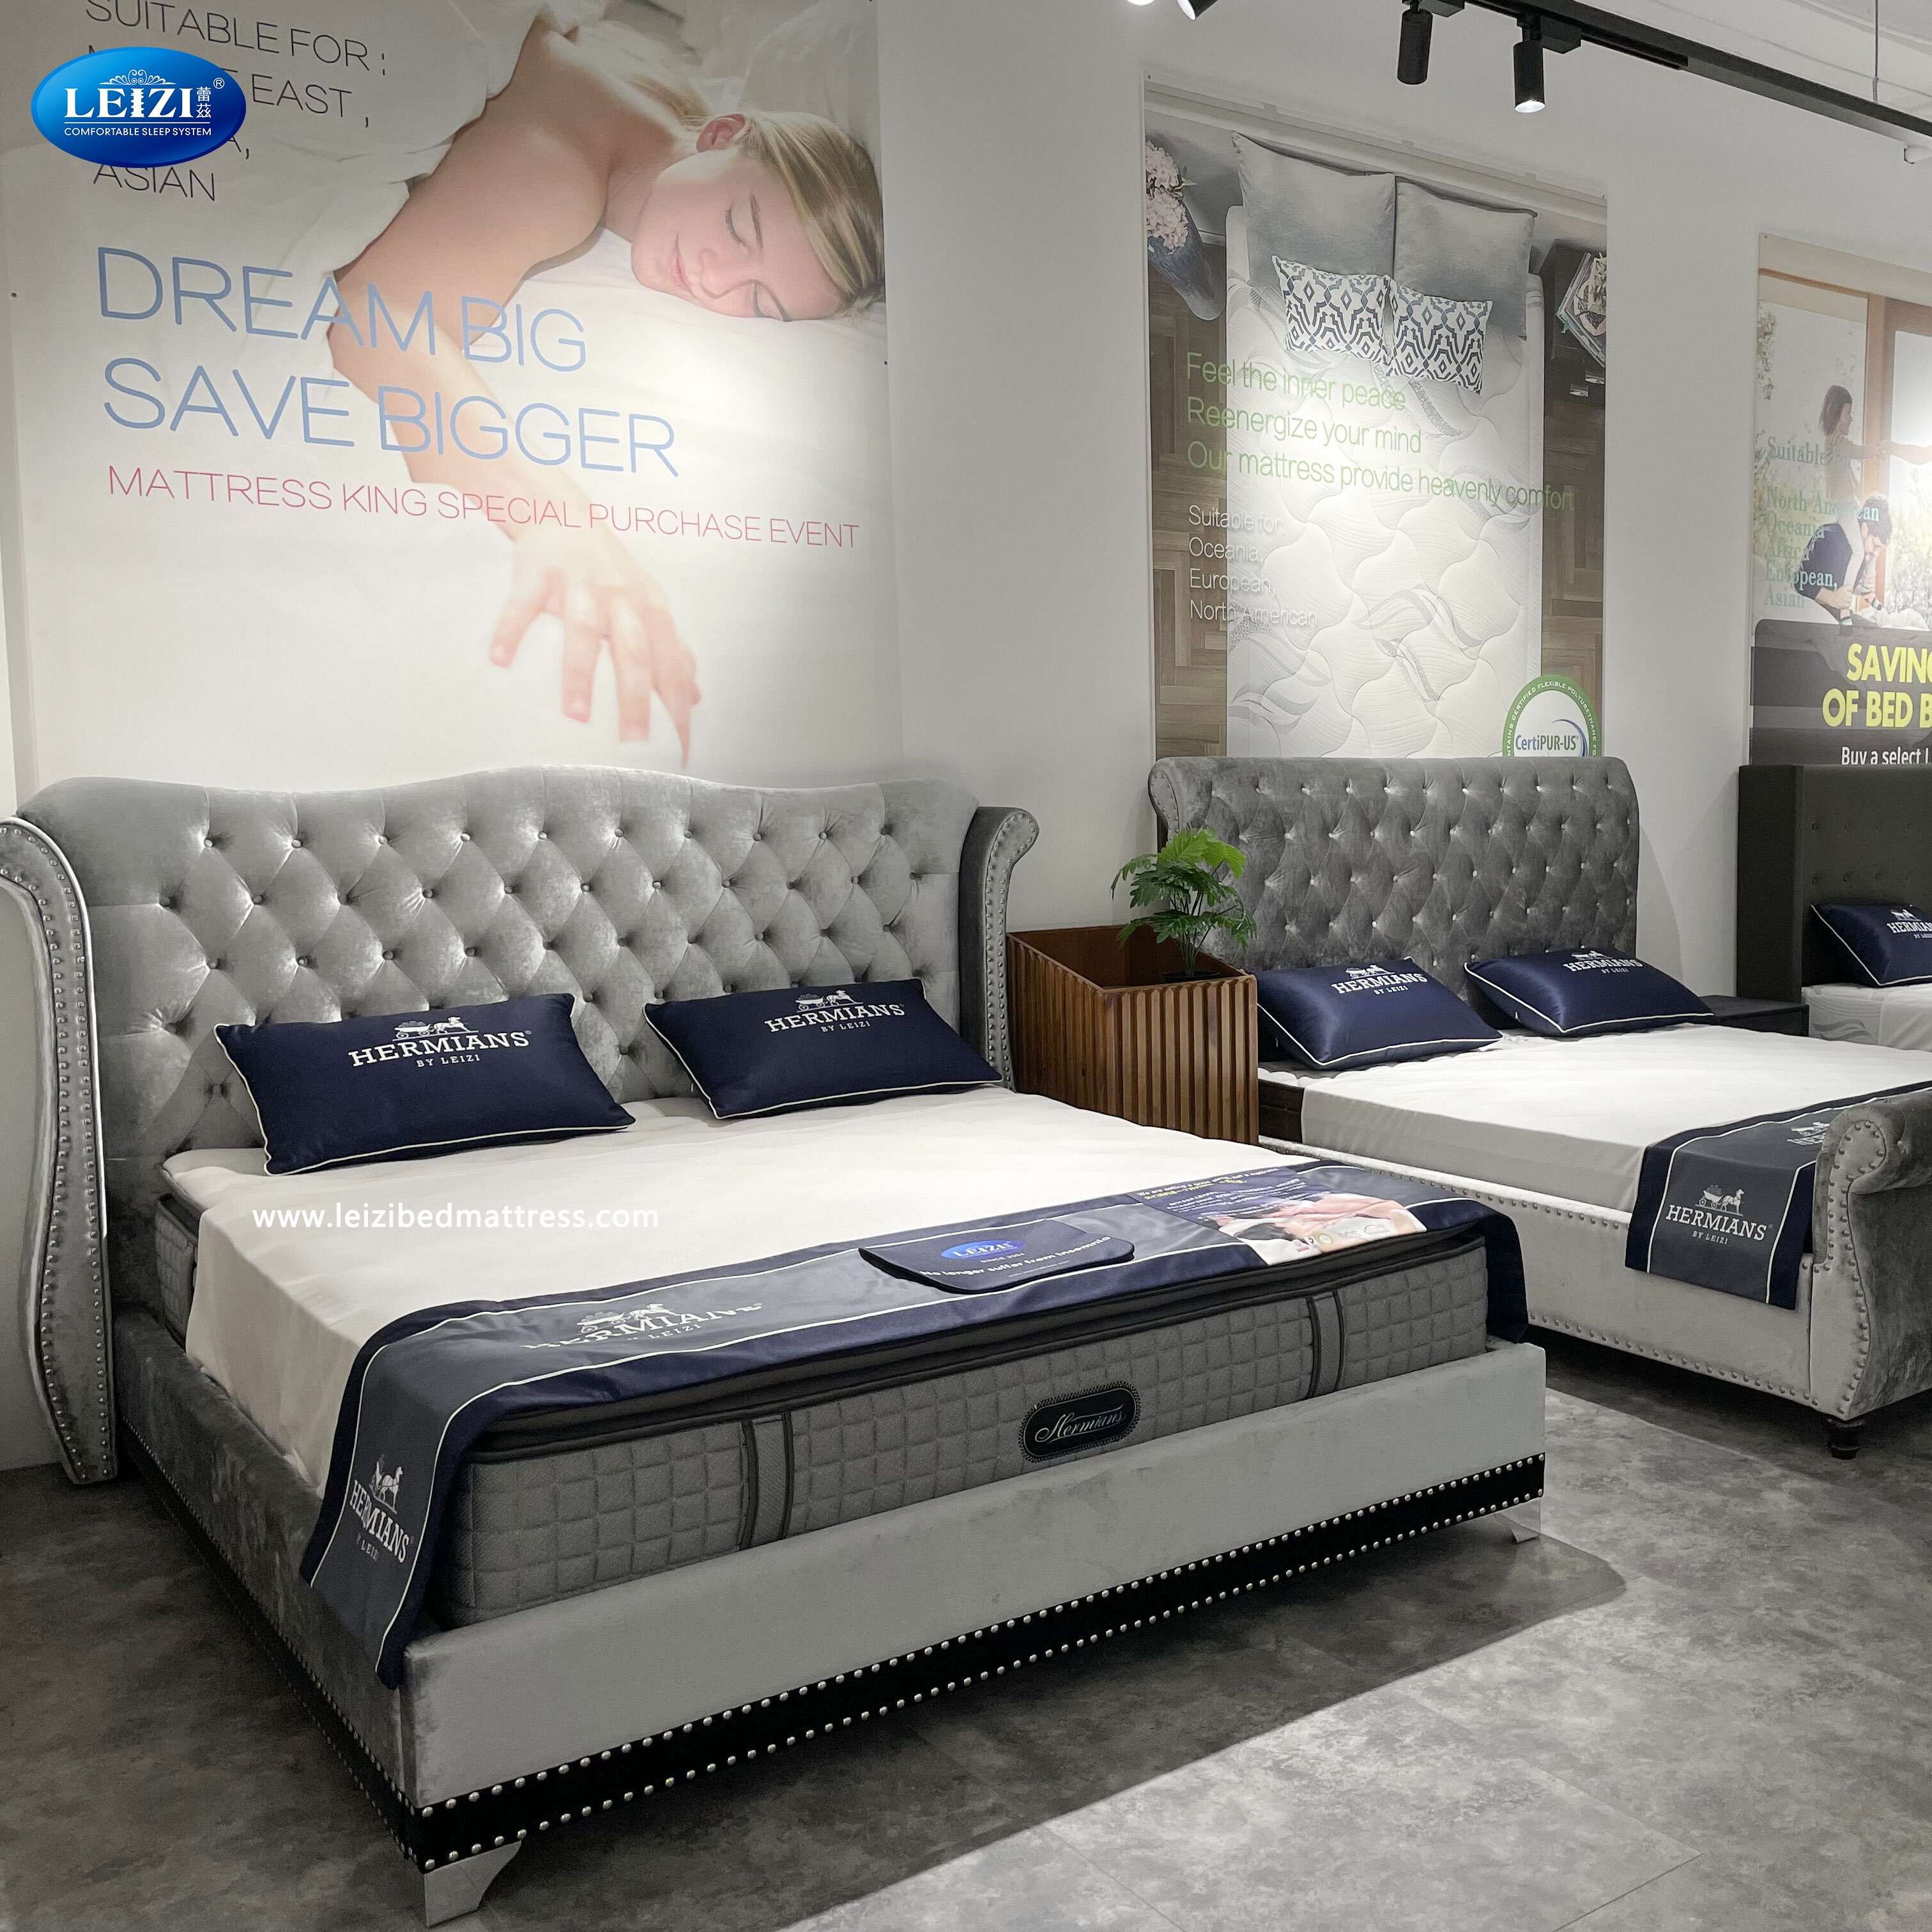 How To Choose Mattress? - A Purchase Guide For You